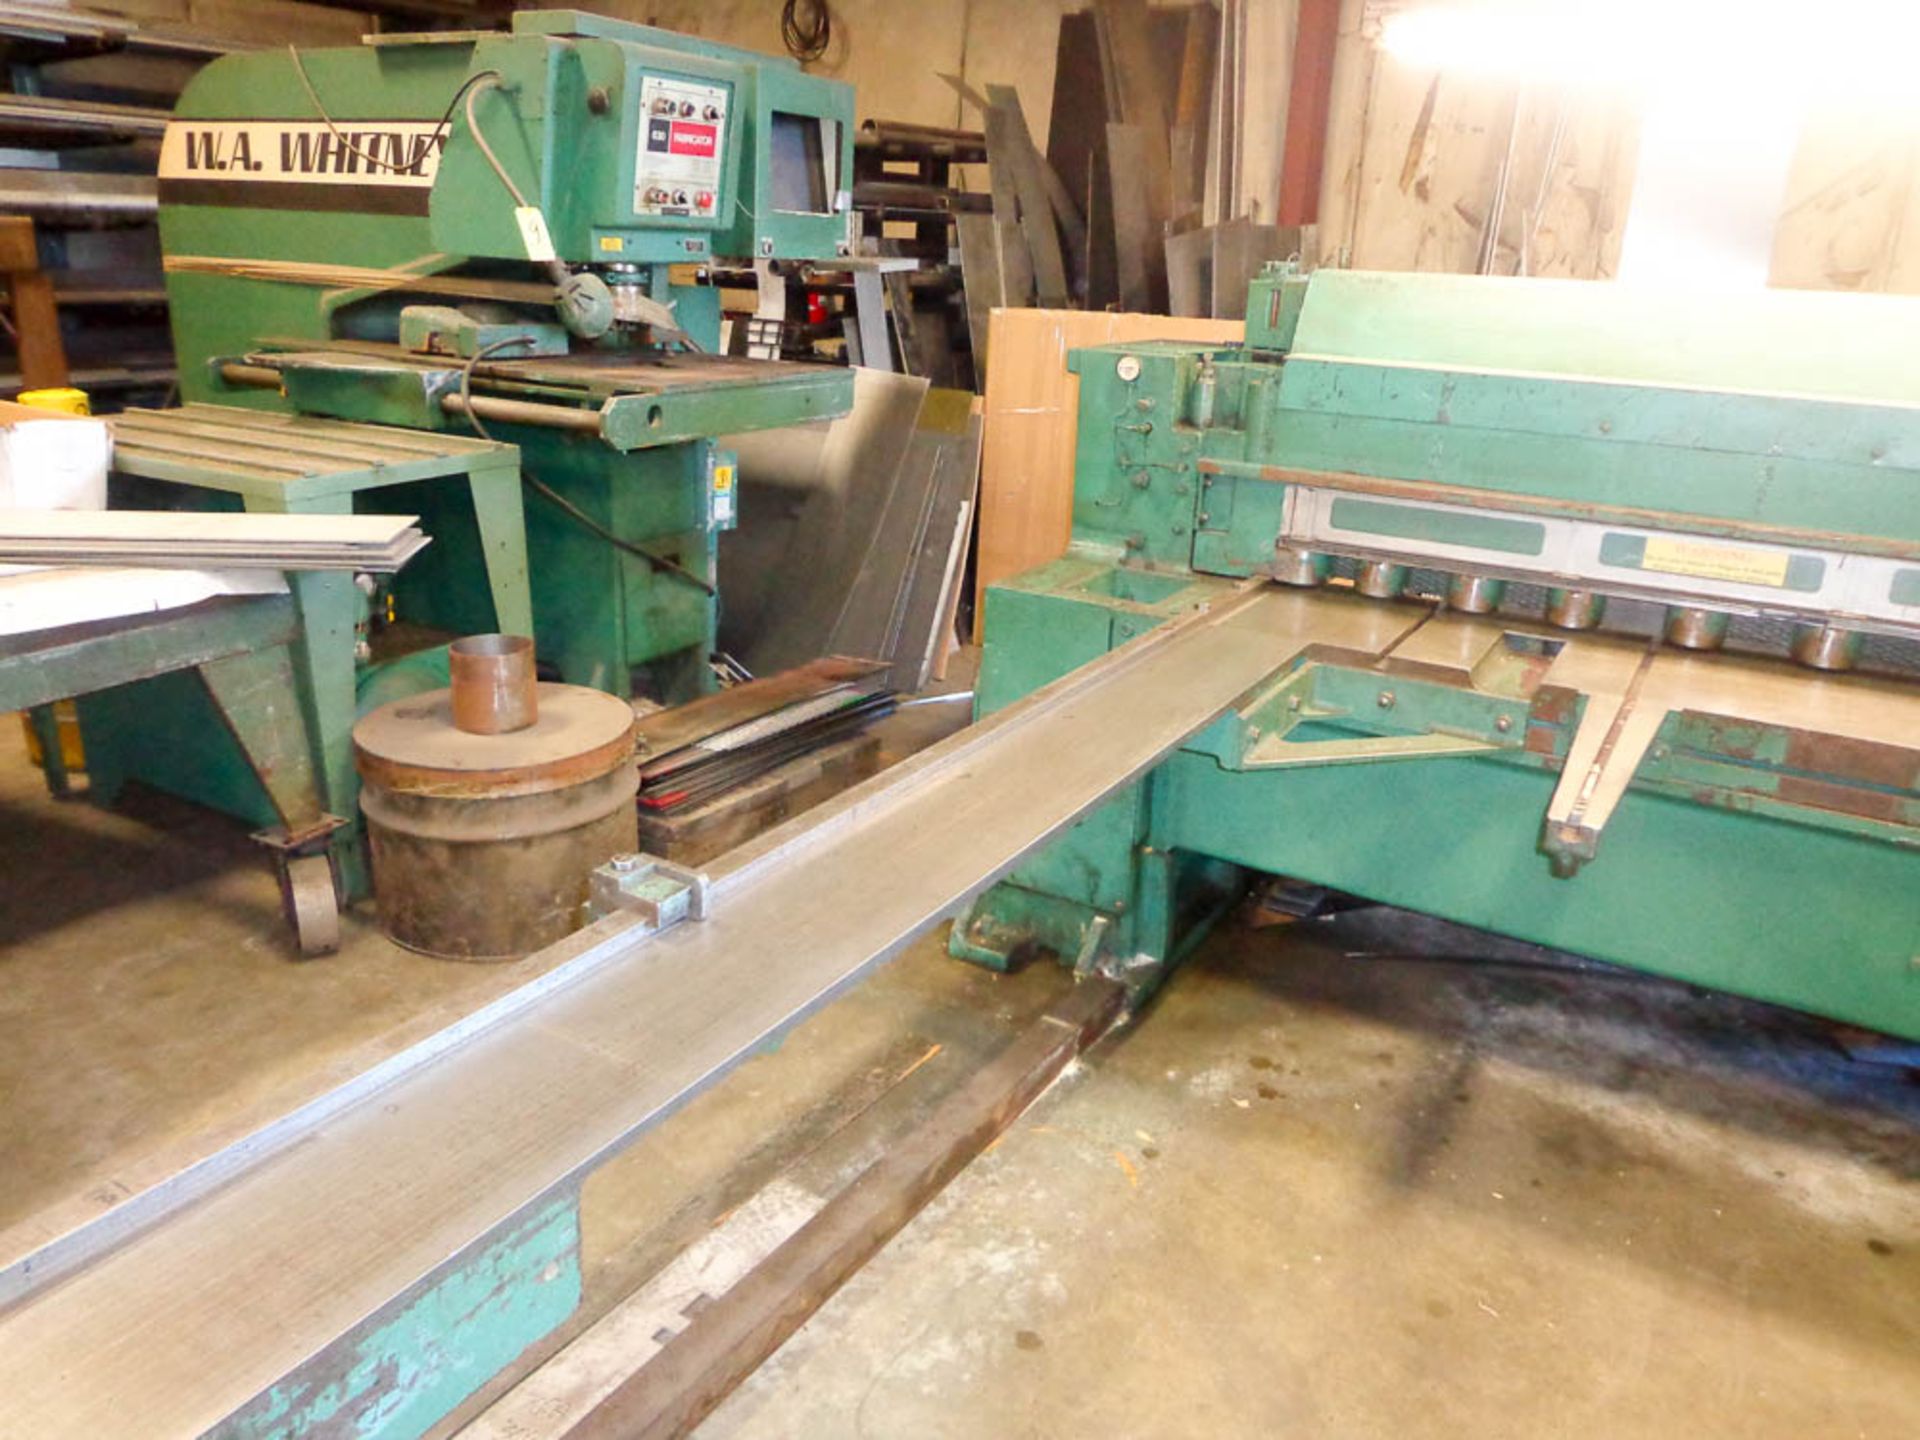 WYSONG MDL. 1025 10' SHEAR, 1/4'' CAPACITY, 9'-3'' SQUARING ARM, PUSH BUTTON, FOOT PEDAL CONTROLS, - Image 3 of 5